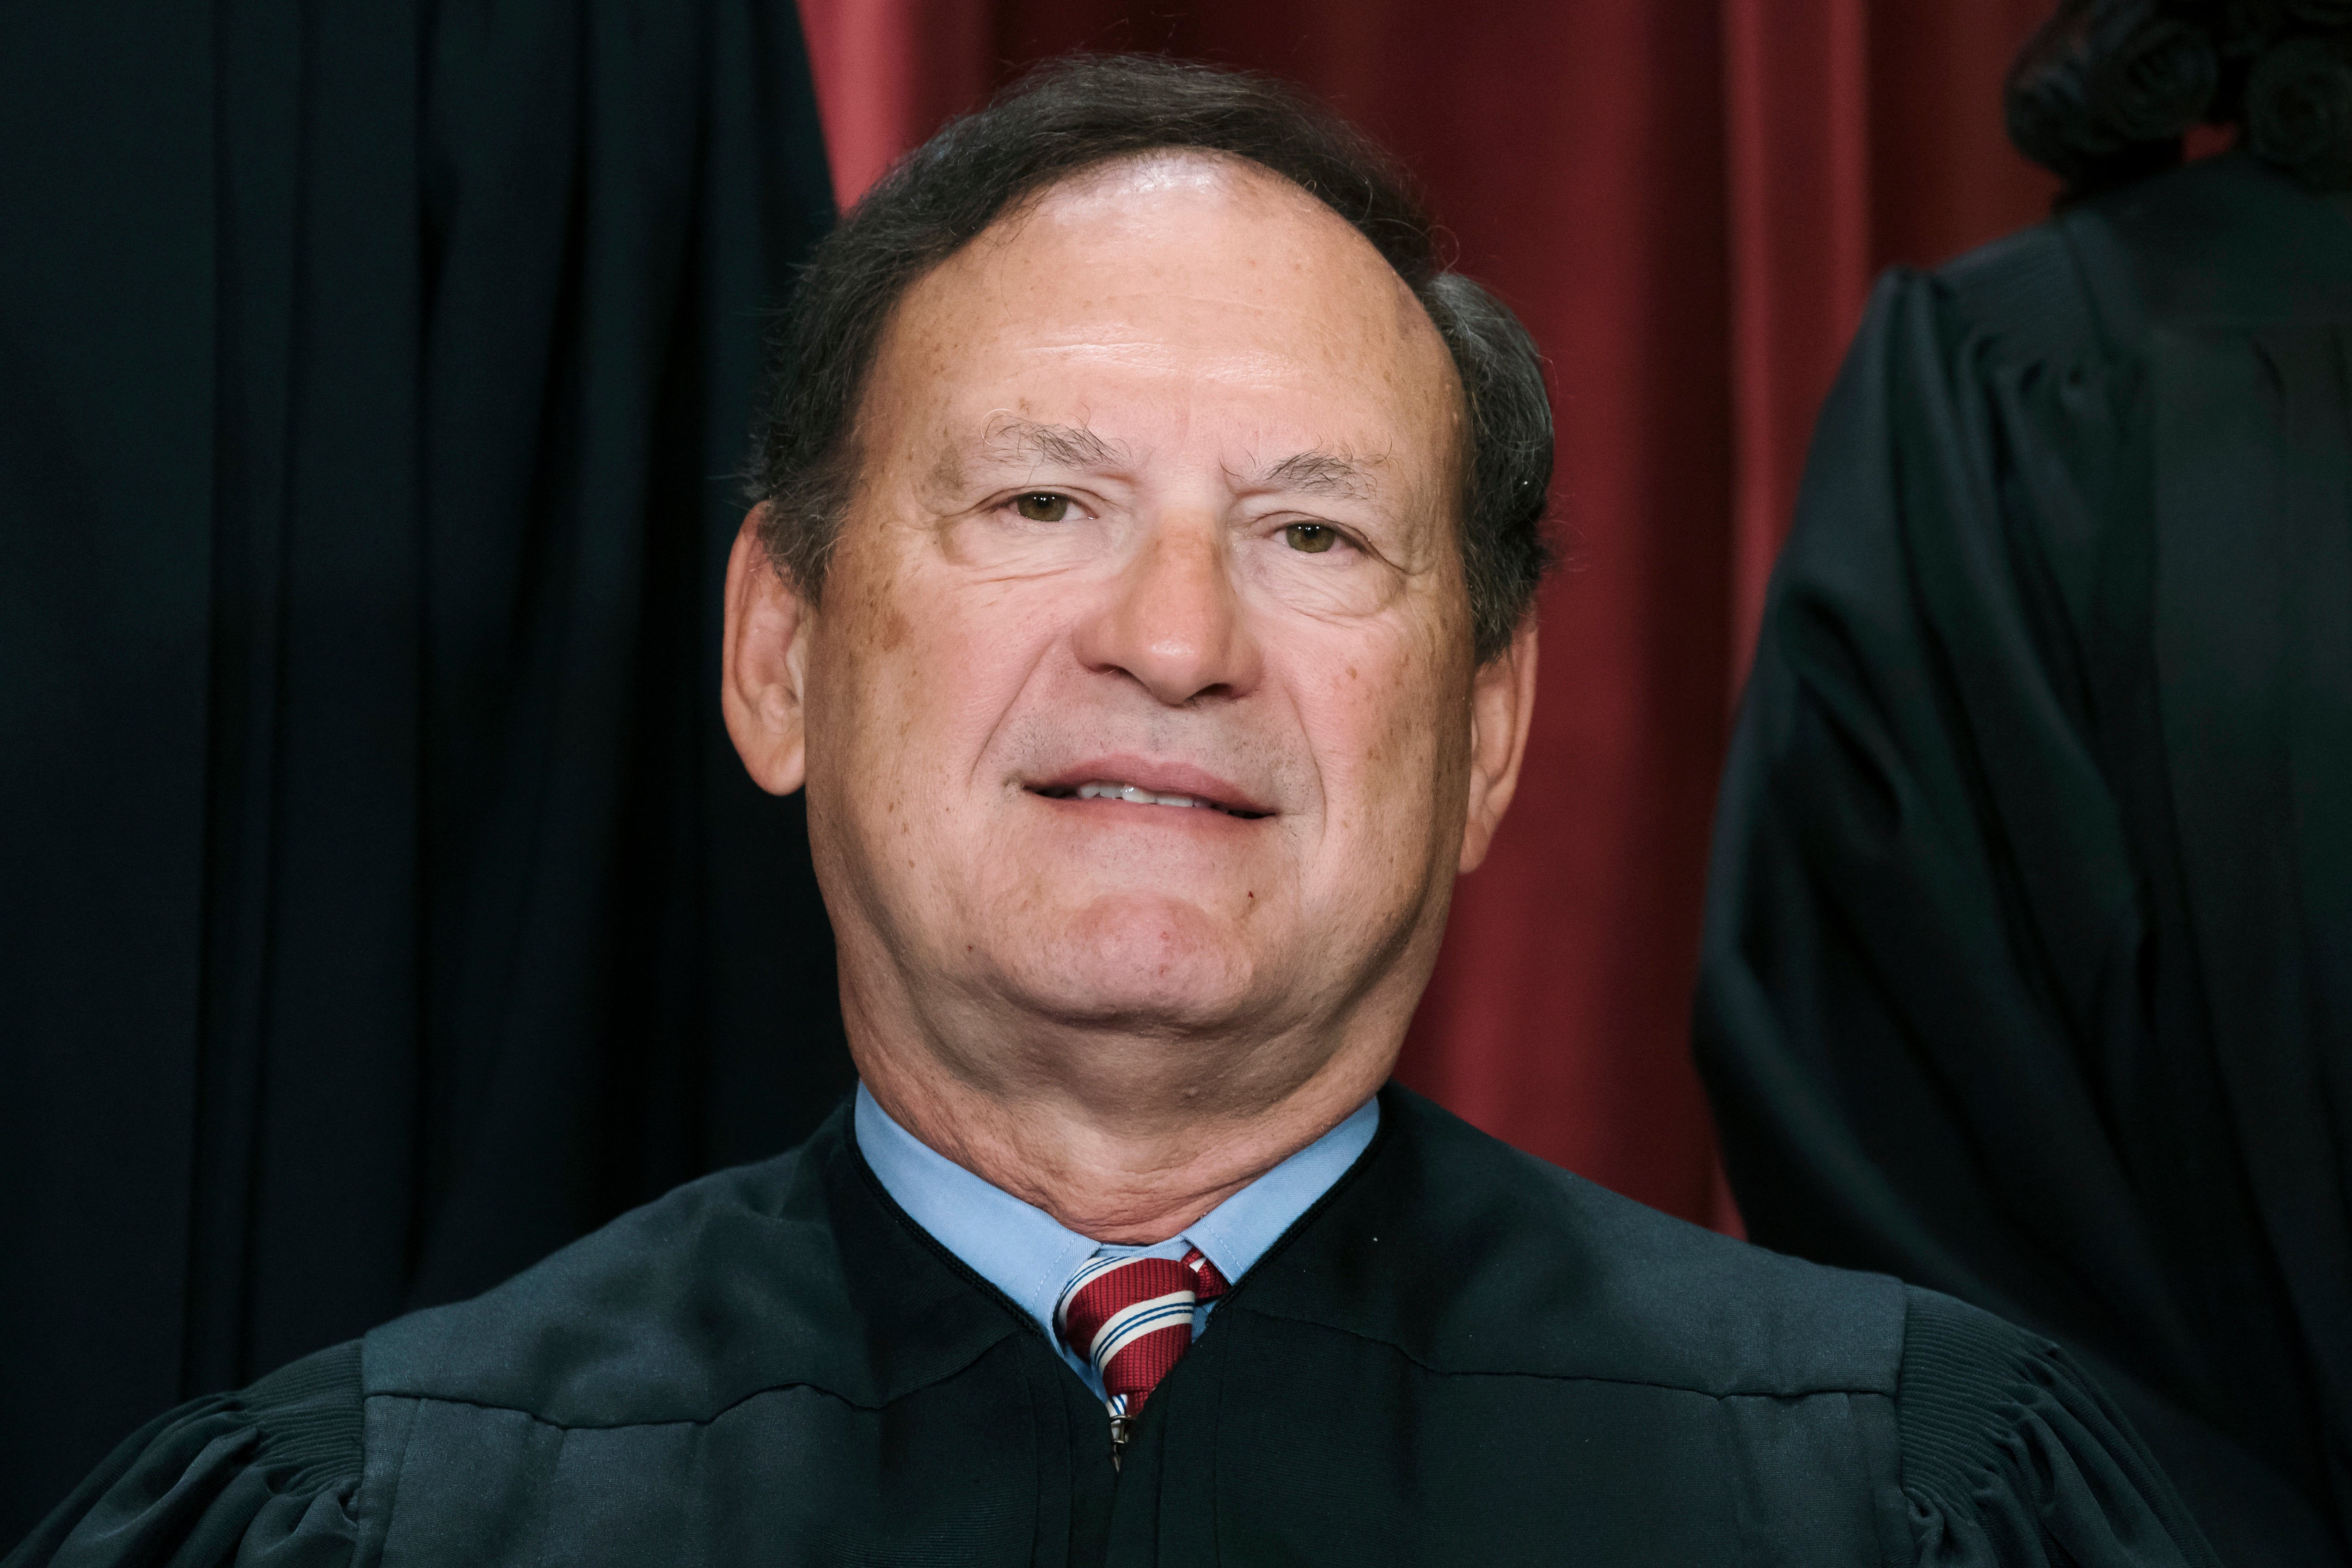 Embattled Supreme Court Justice Samuel Alito said he agrees the US should ‘return to a place of godliness,’ during a conversation that was secretly recorded earlier this month